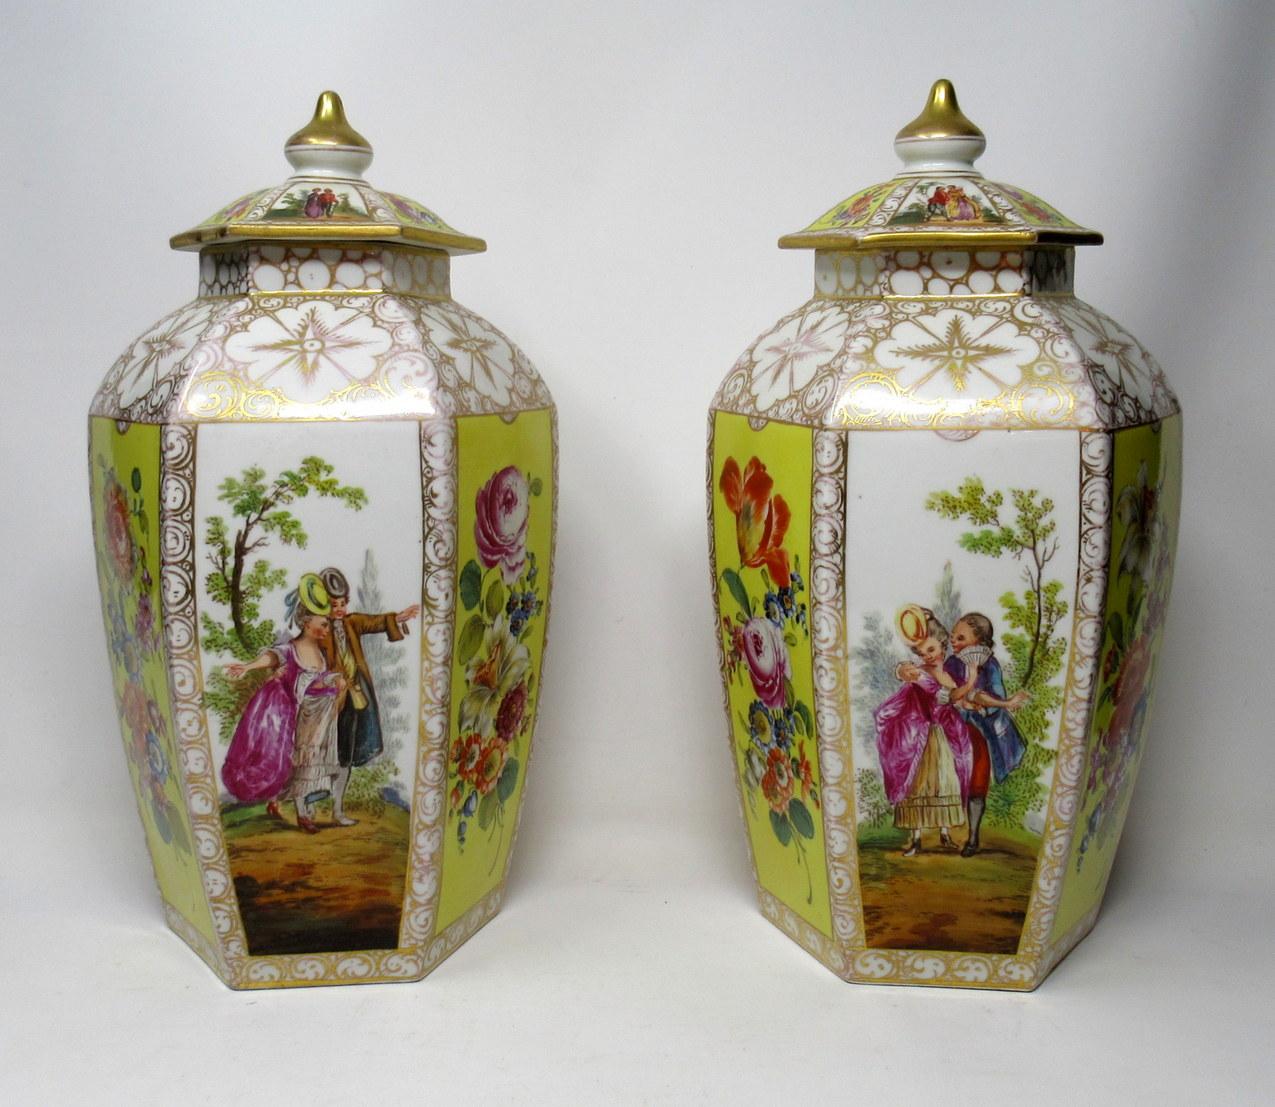 An exceptionally fine quality pair of hand painted Dresden stoneware vases and covers, of tapered in hexagonal outline, complete with their original firm fitting dome shaped covers with lobed gilt finials, last half of the 19th century.

Each hand